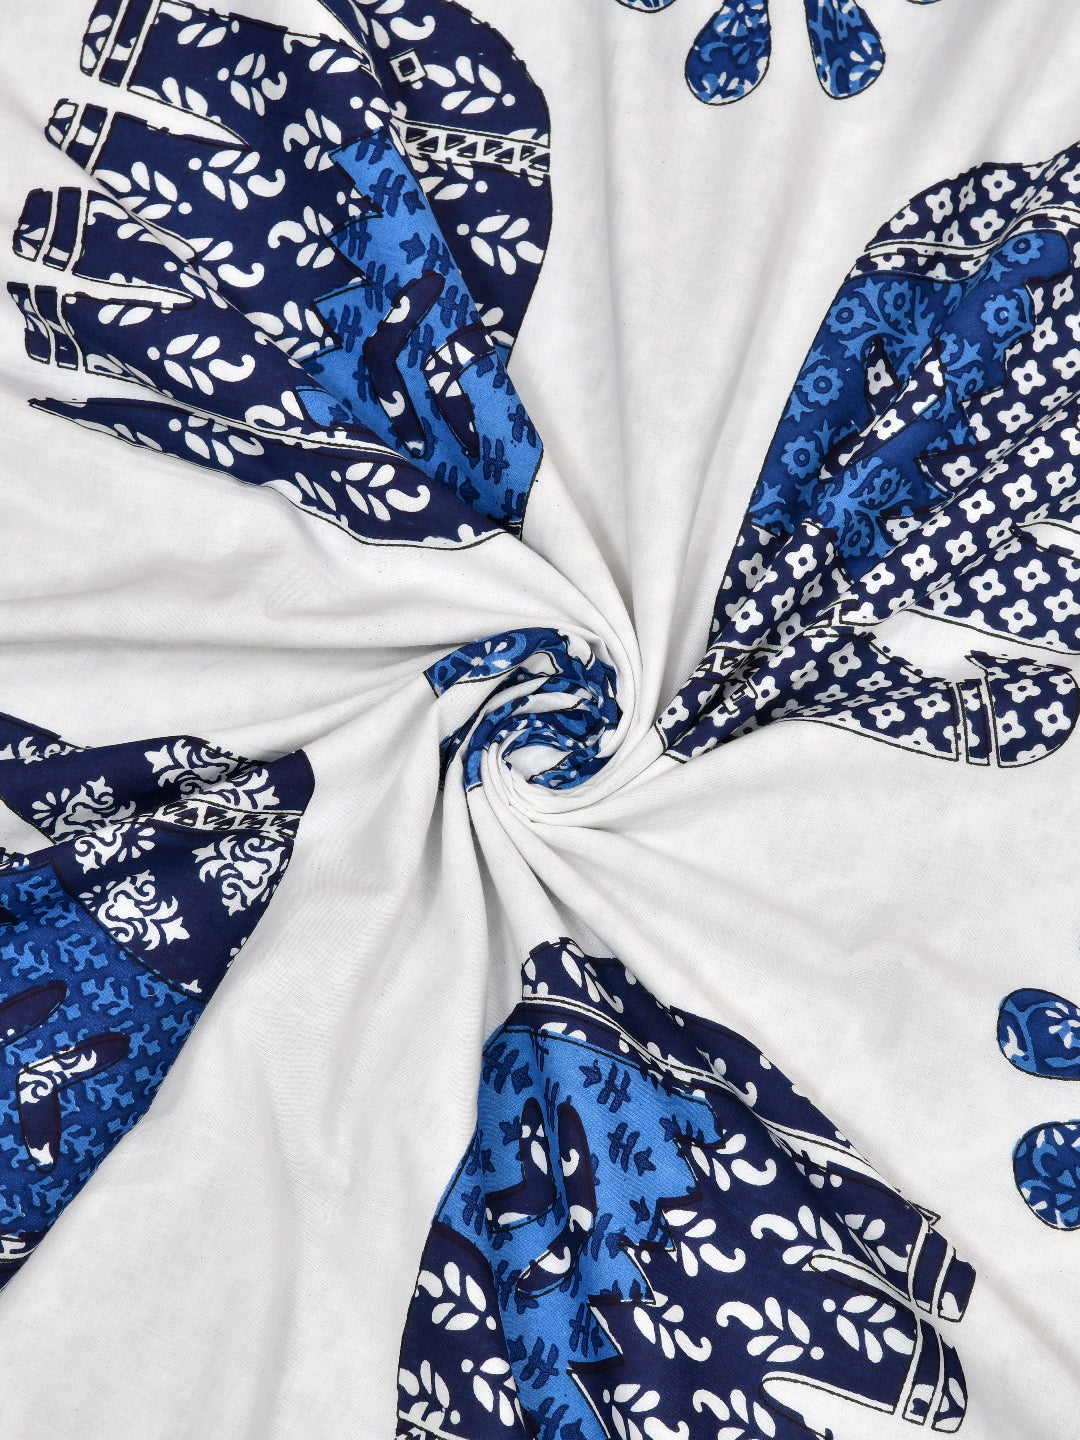 LIVING ROOTS Blue and White Elephant Block Print Reversible AC Dohar- 100% Cotton (21-011-A)